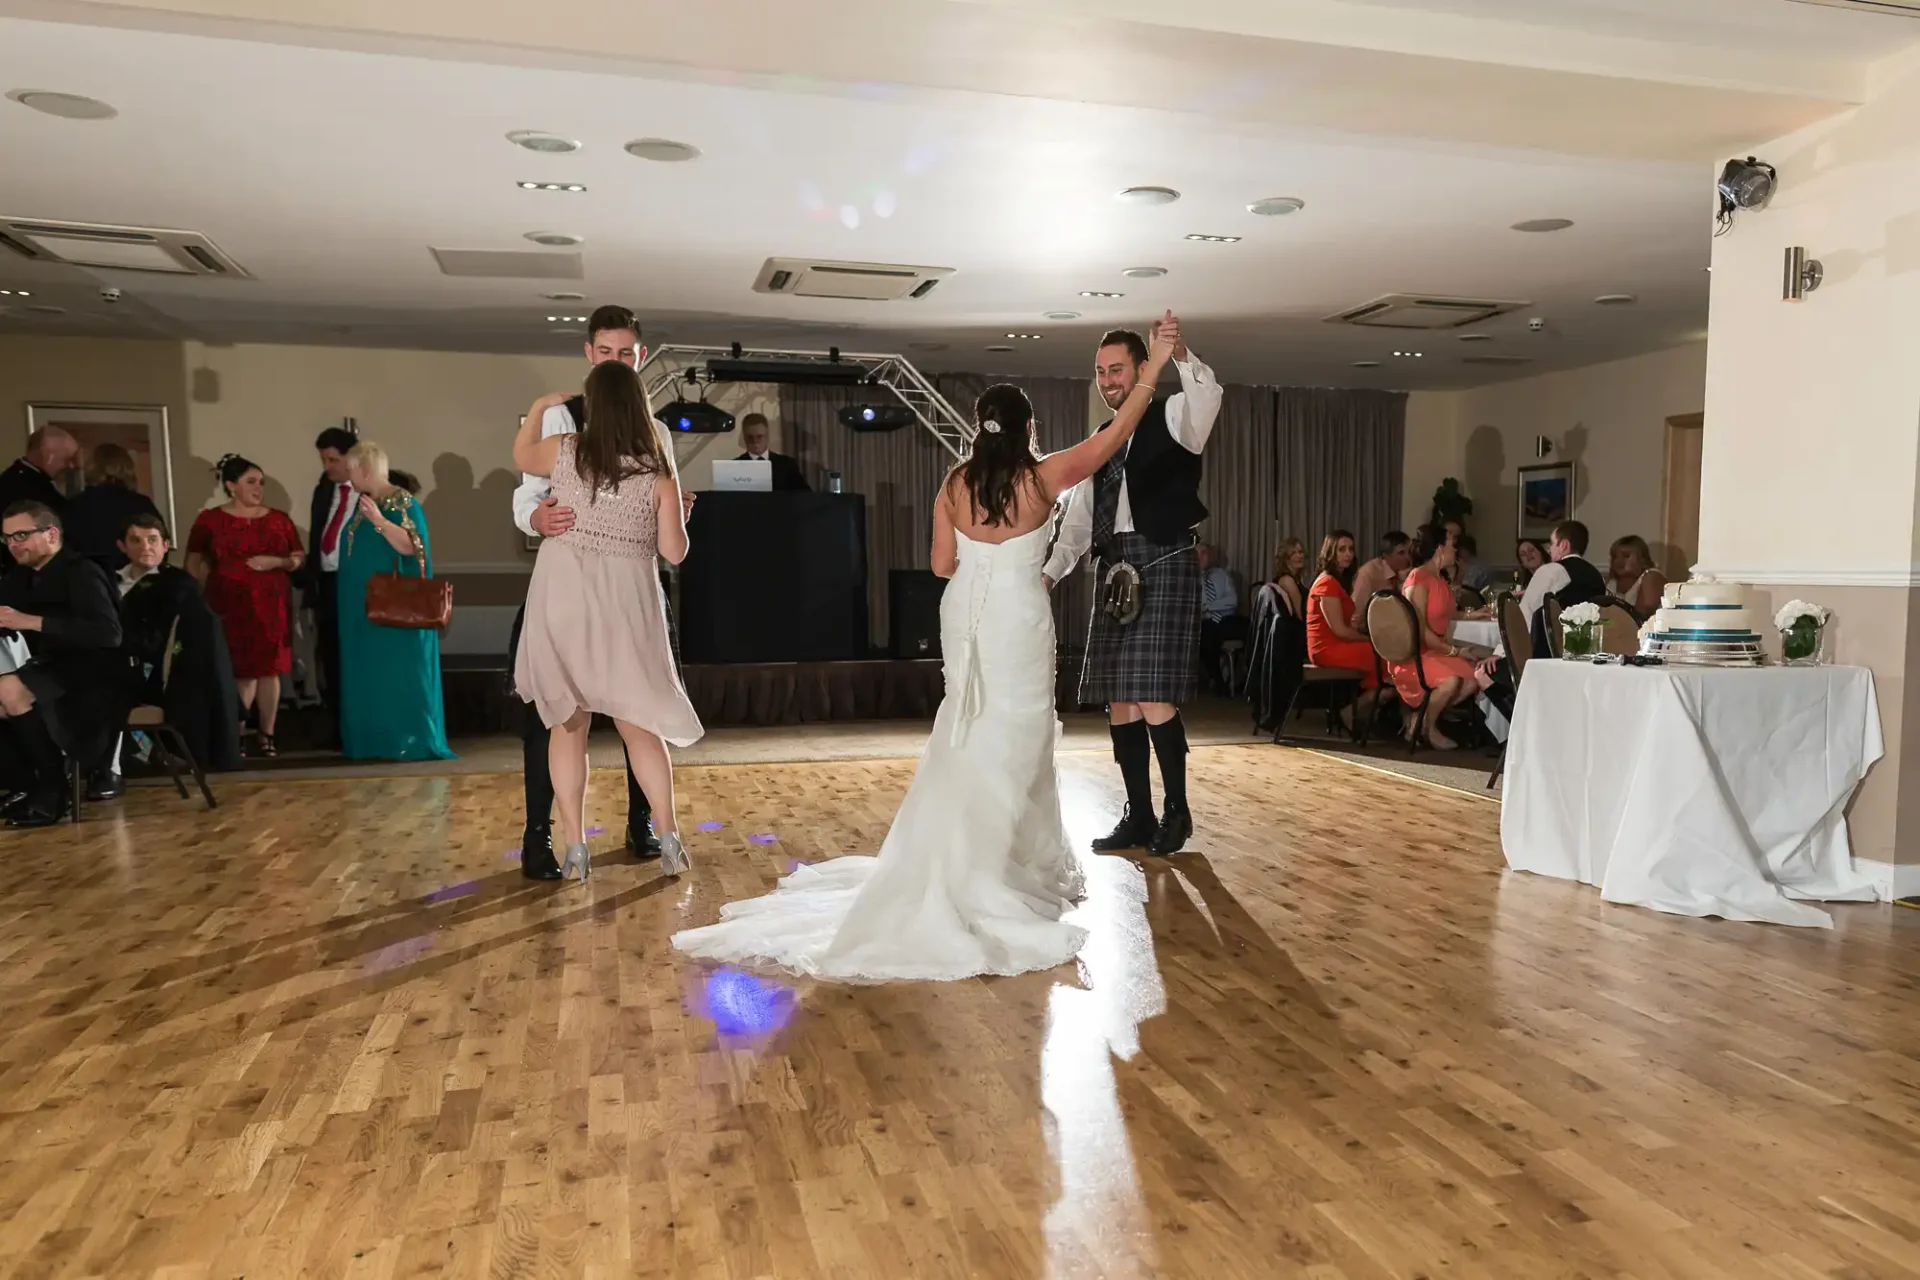 A wedding reception dance floor scene with two couples dancing, one man in a kilt, with onlookers in a warmly lit hall.